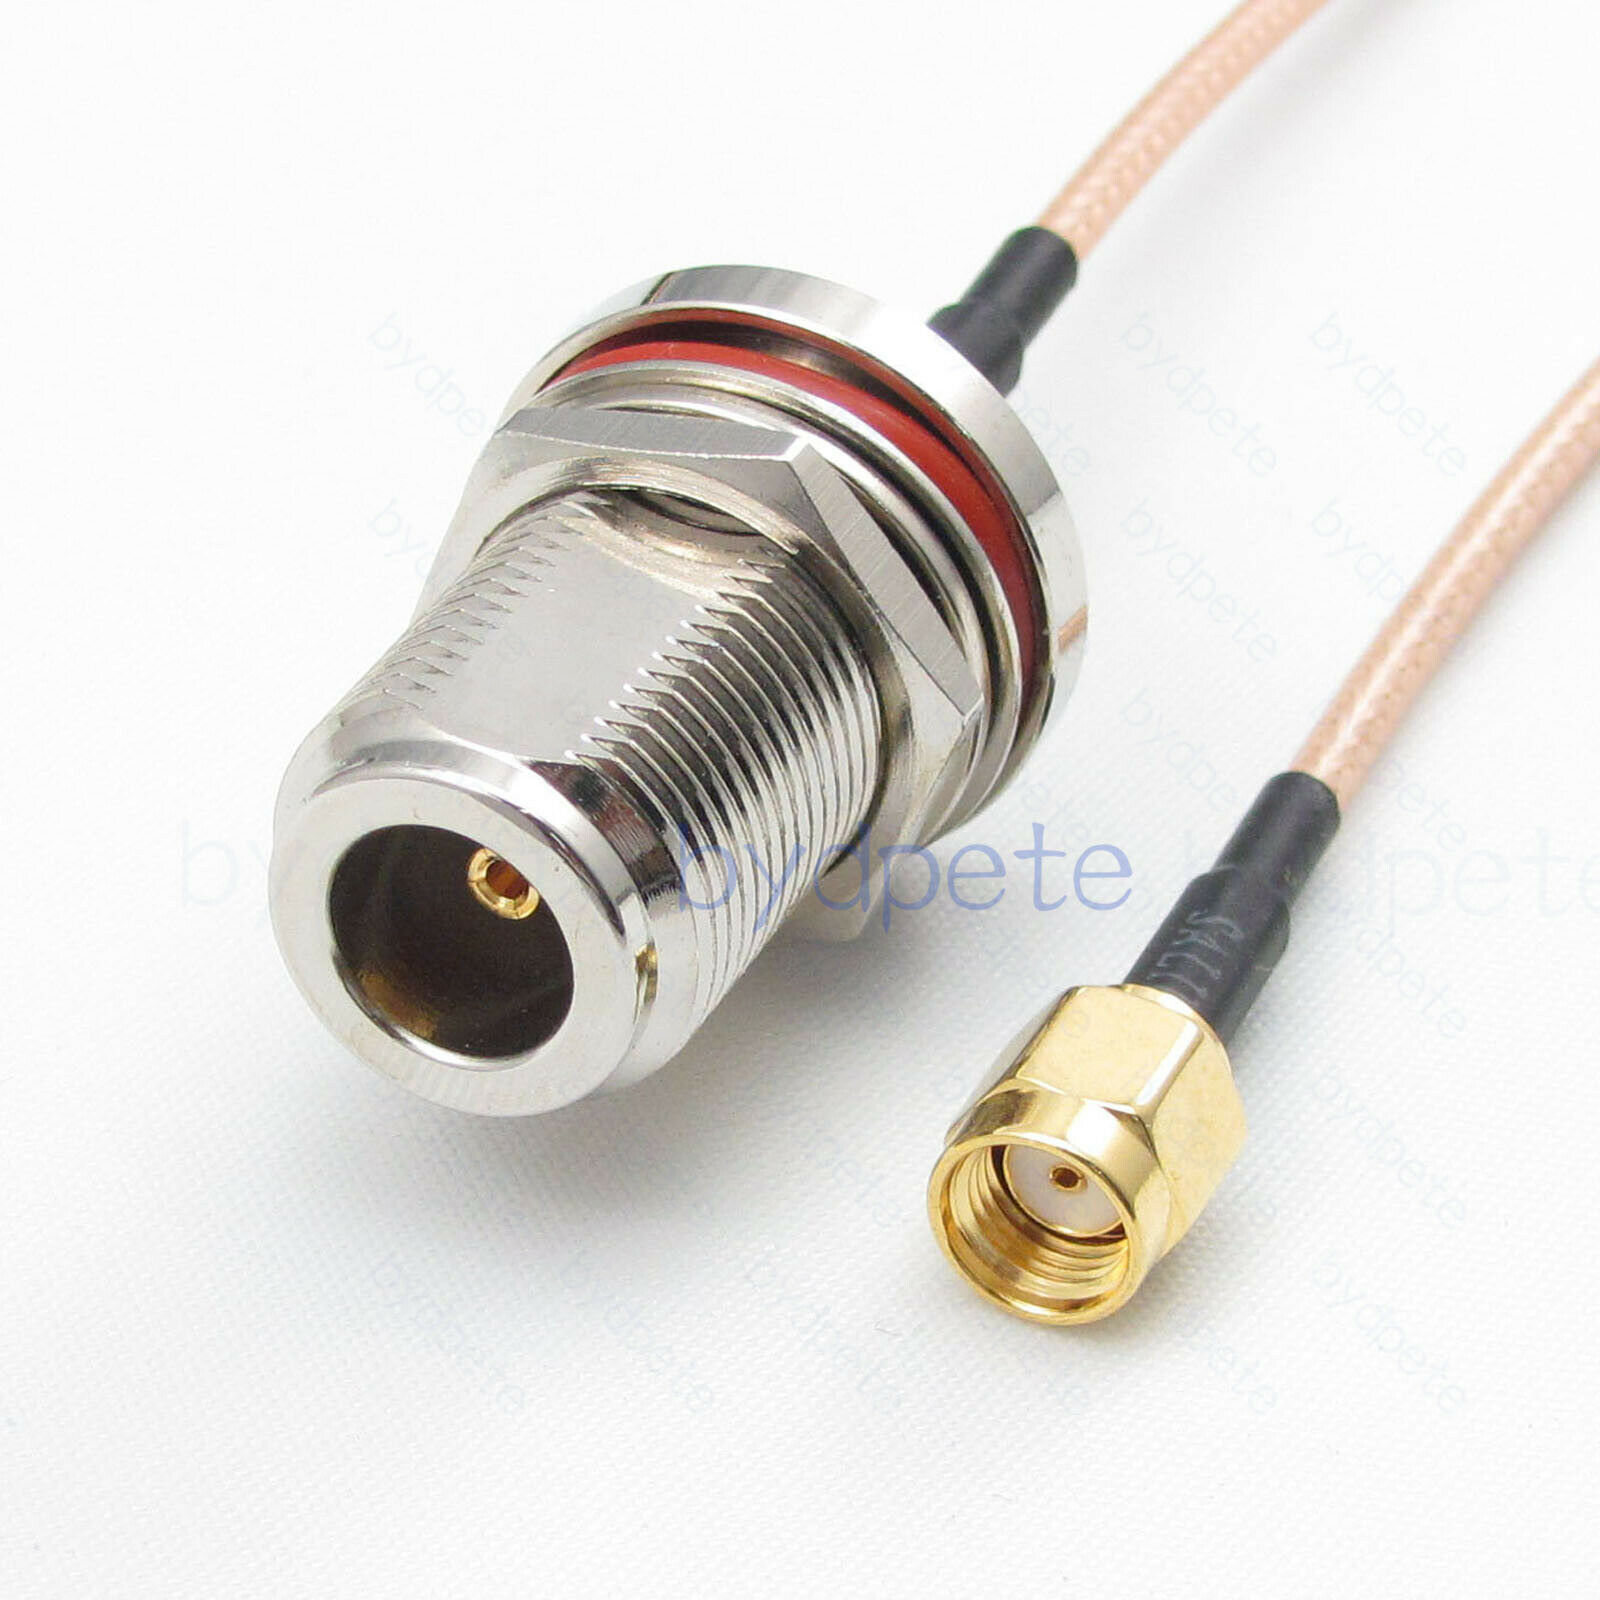 N female bulkhead waterproof H-cut to RP-SMA male Reverse Polarity RG-316 RG316 cable coaxial pigtail coax kable 50ohms BYDC027N316W1 N-SMA